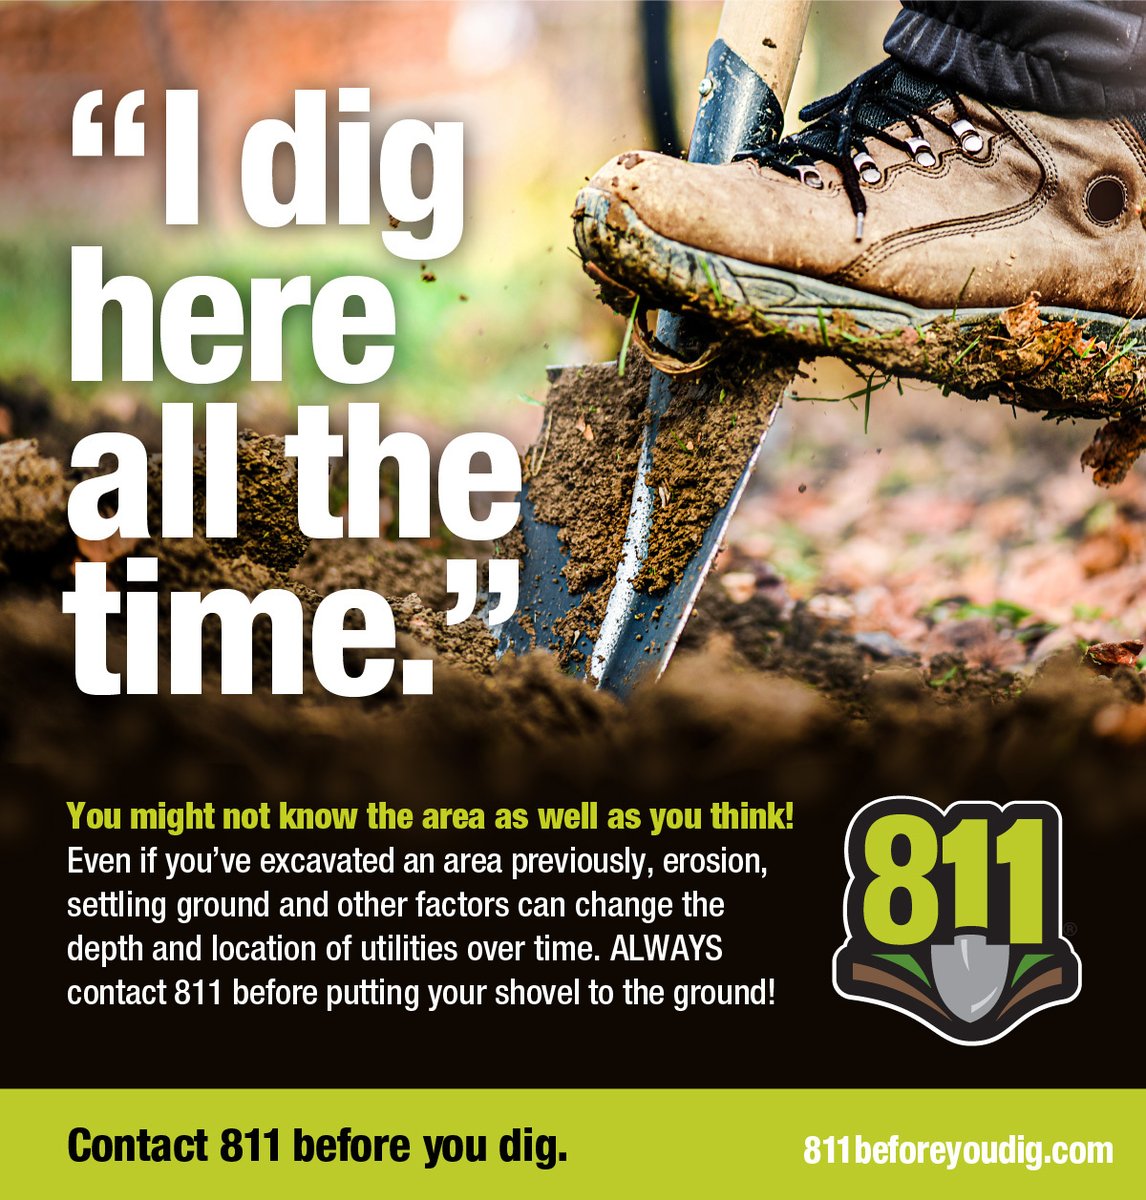 Ready to start your next outdoor project? Calling 811 or visiting 811beforeyoudig.com Get your utilities marked so you can #KnowWhatsBelow and keep yourself and your community safe. #SJG #EveryDigEveryTime